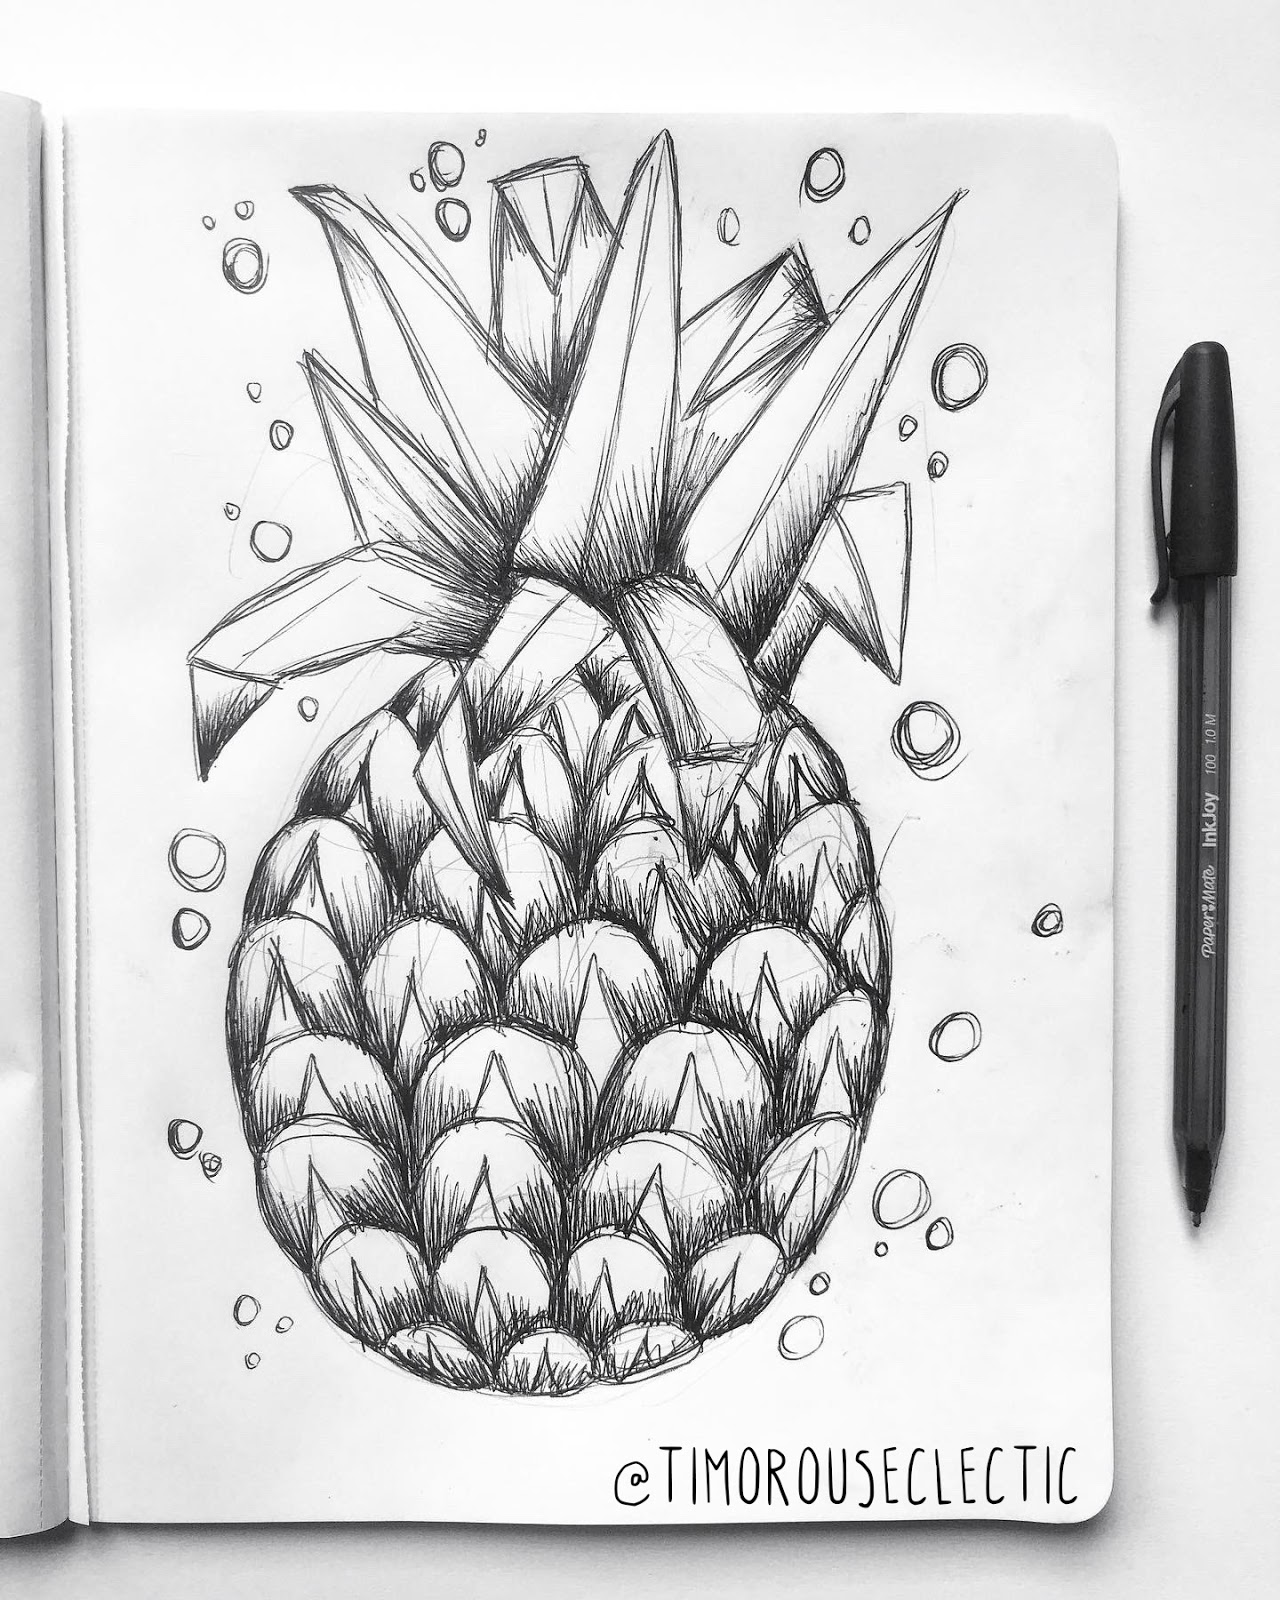 Sketchbook page showing a ballpoint pen drawing of a pineapple